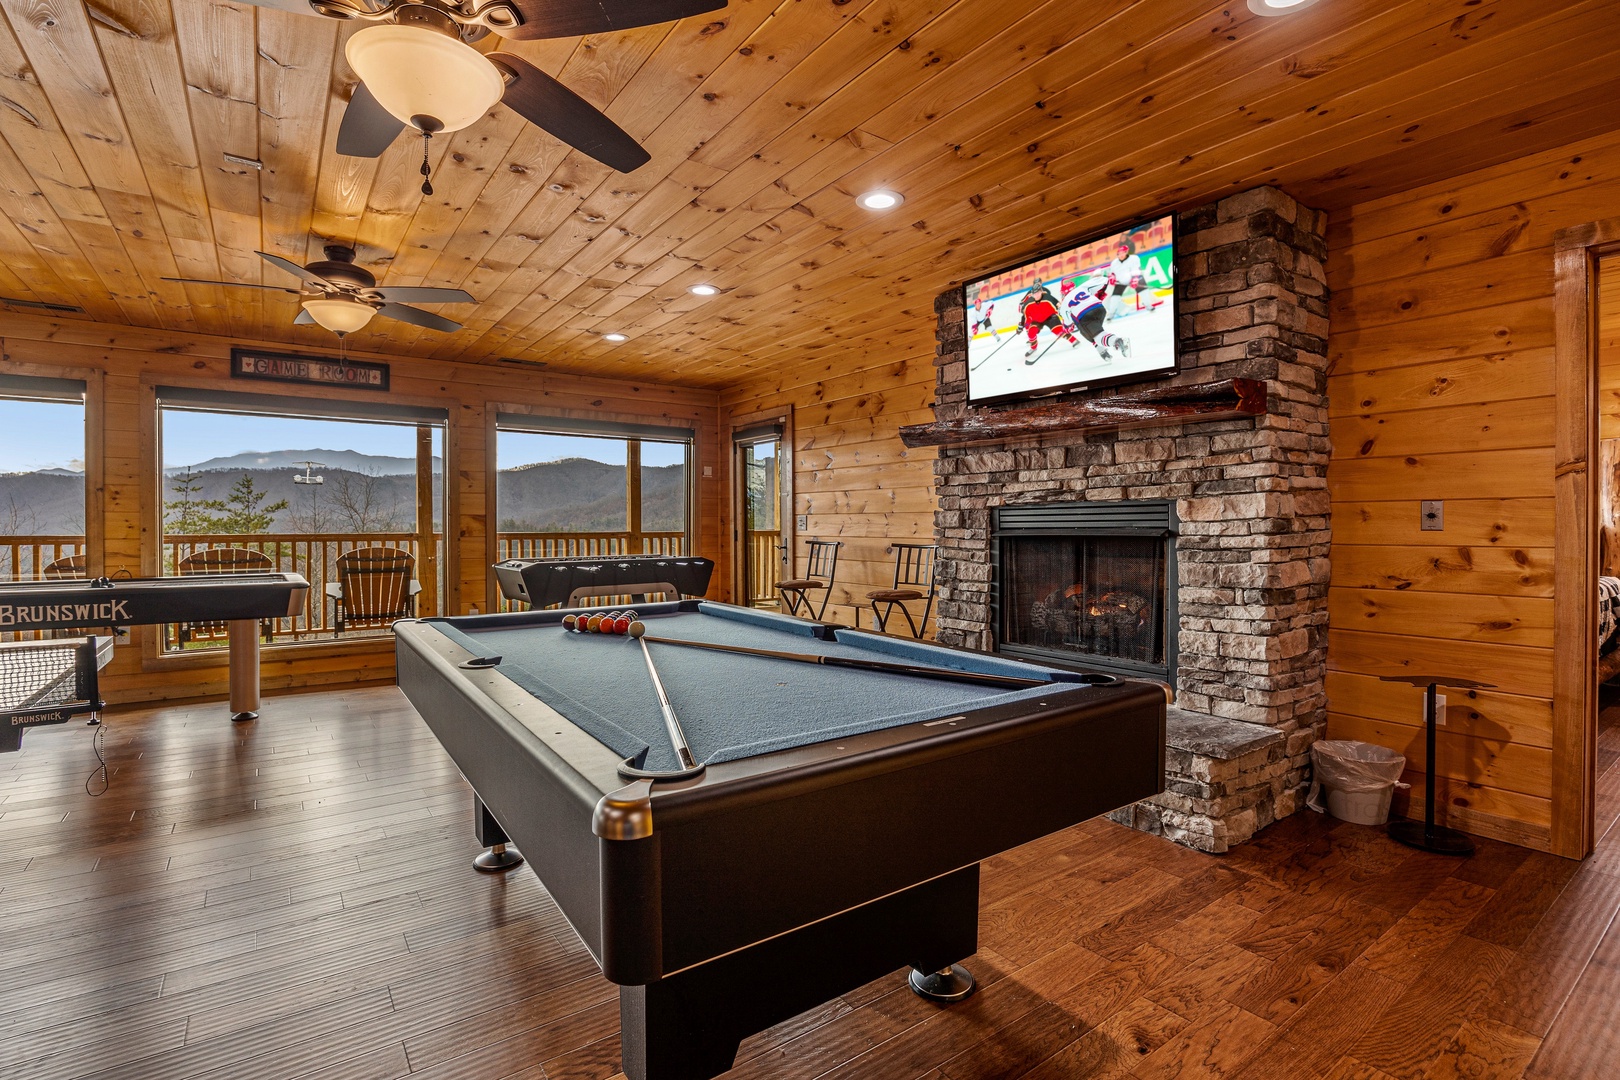 Pool table at Four Seasons Grand, a 5 bedroom cabin rental located in Pigeon Forge